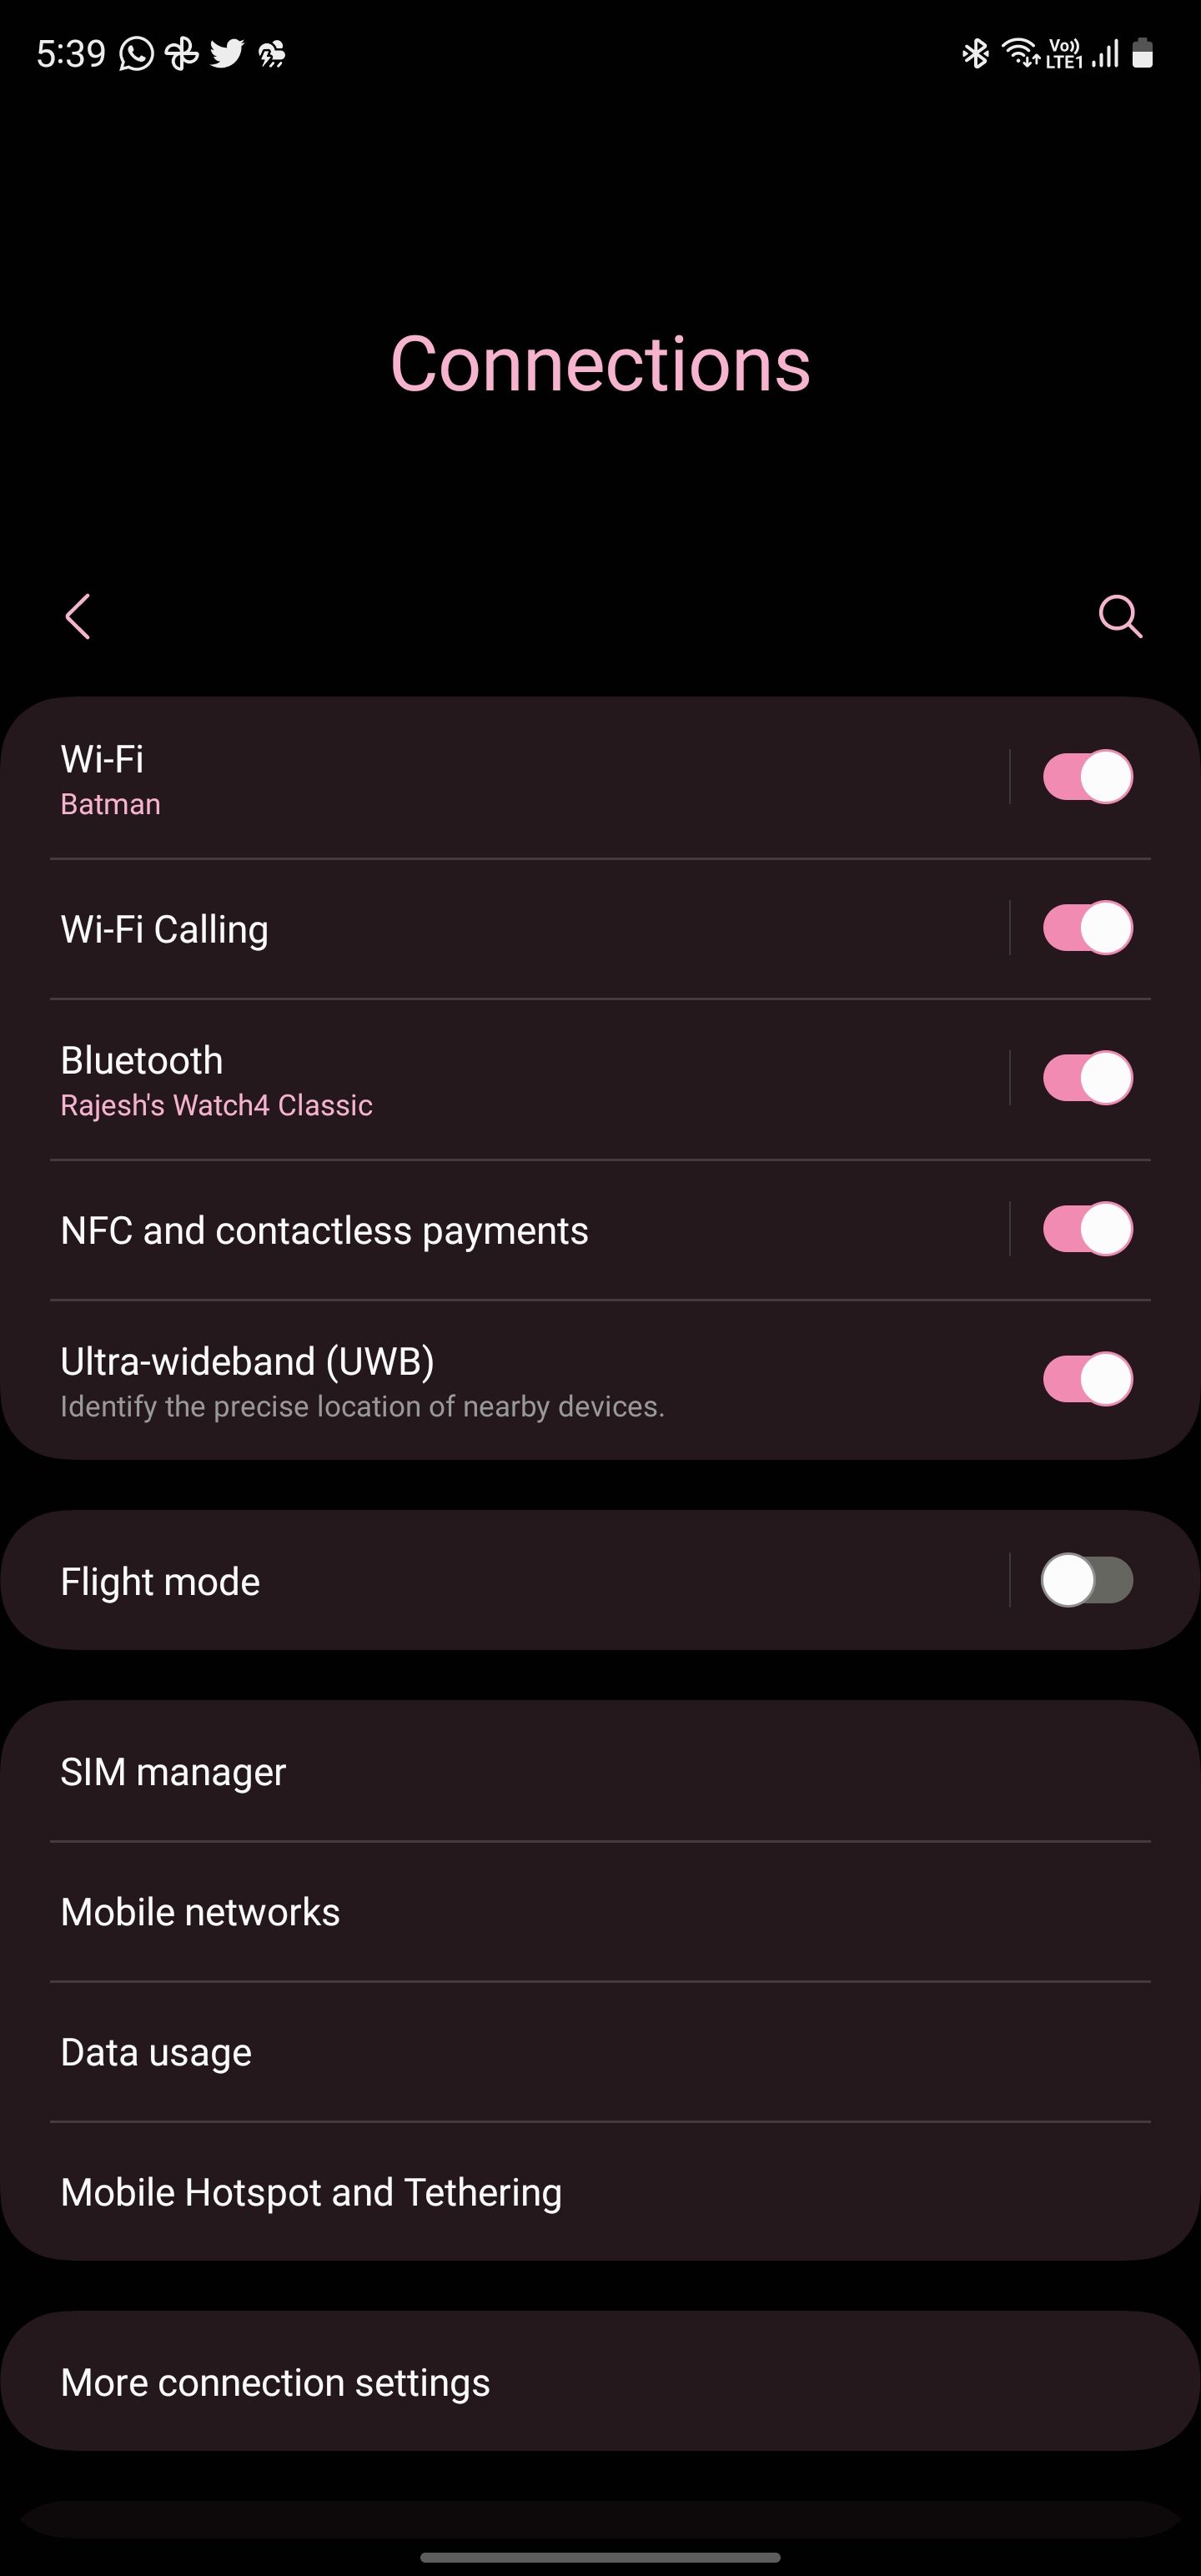 Connections menu in Samsung phone